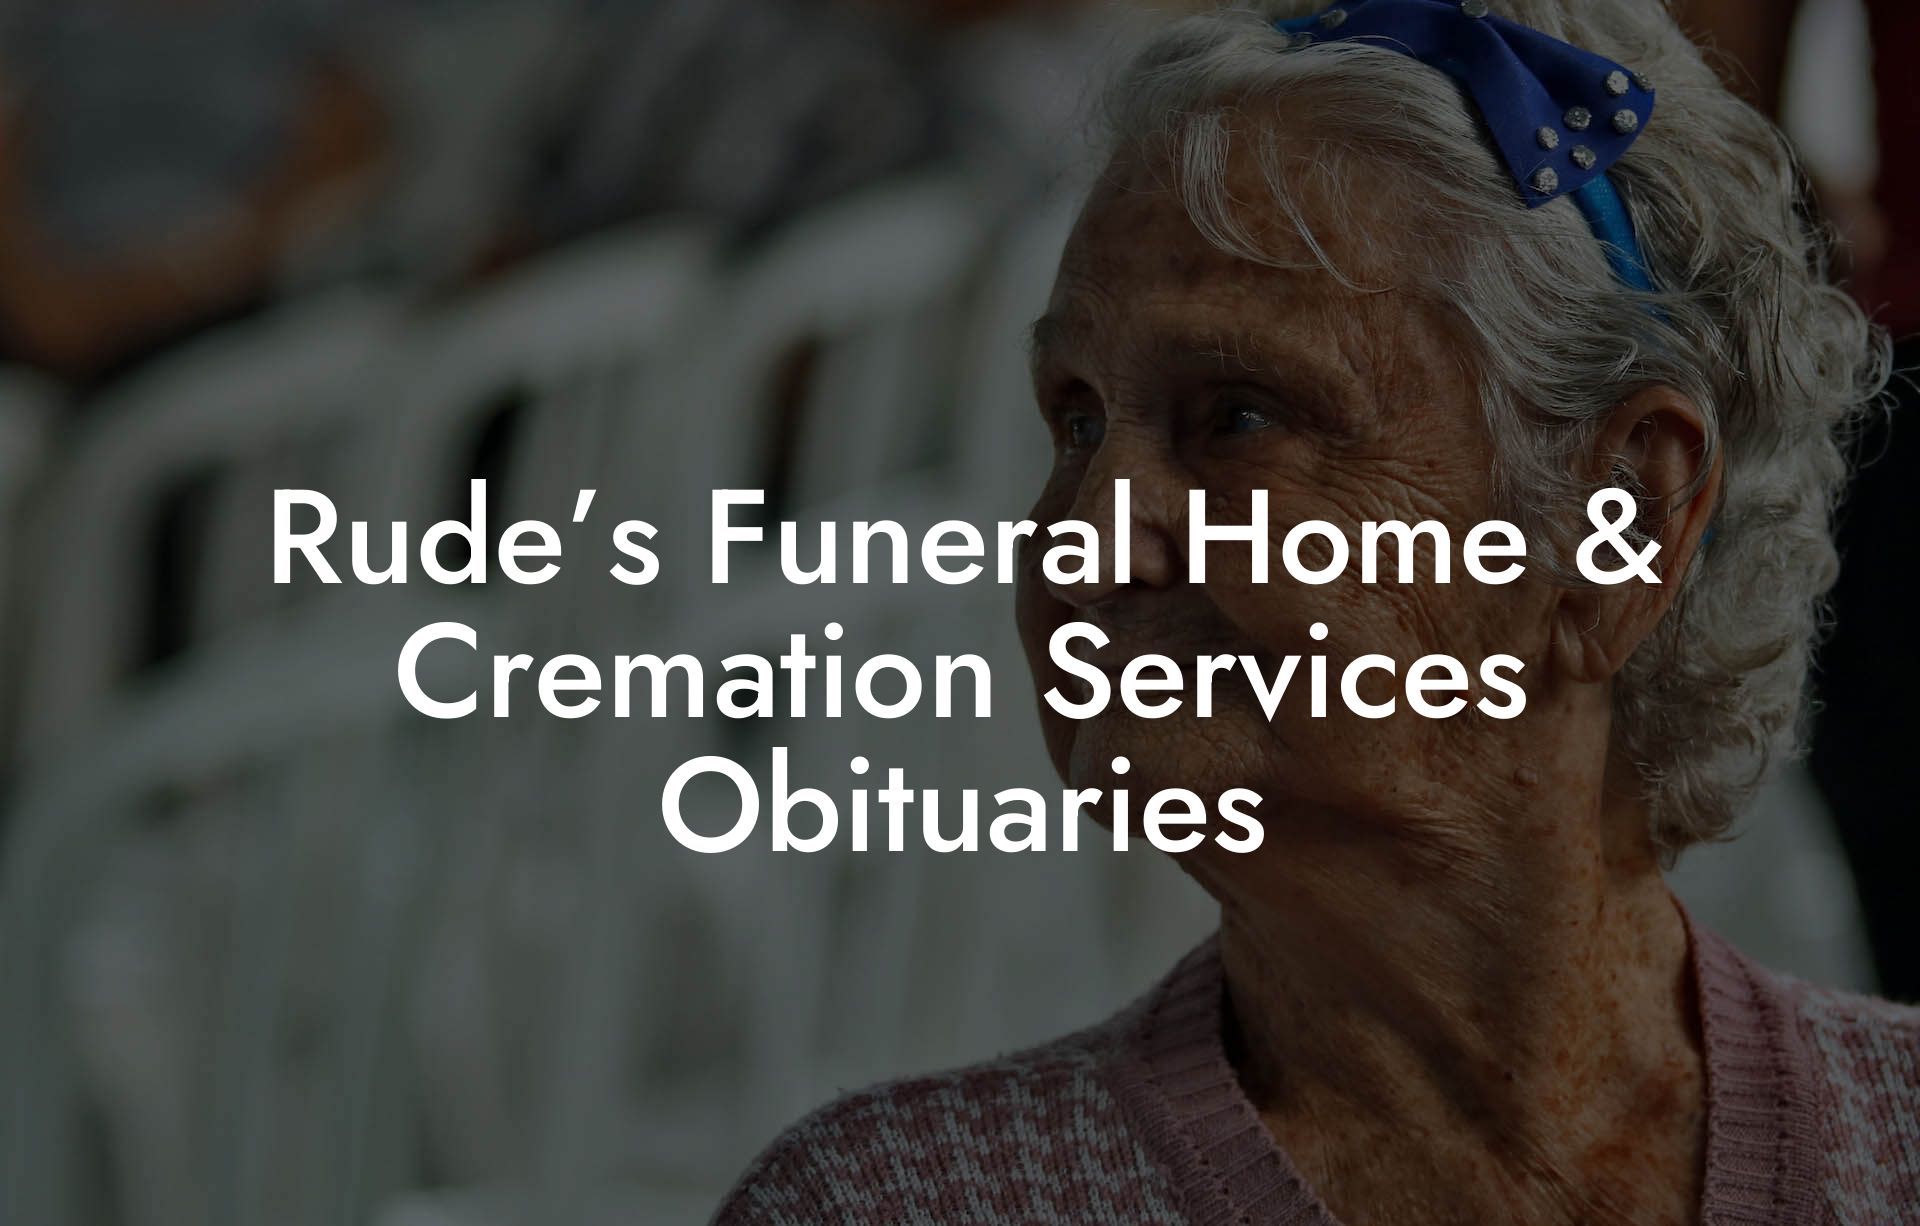 Rude’s Funeral Home & Cremation Services Obituaries Eulogy Assistant